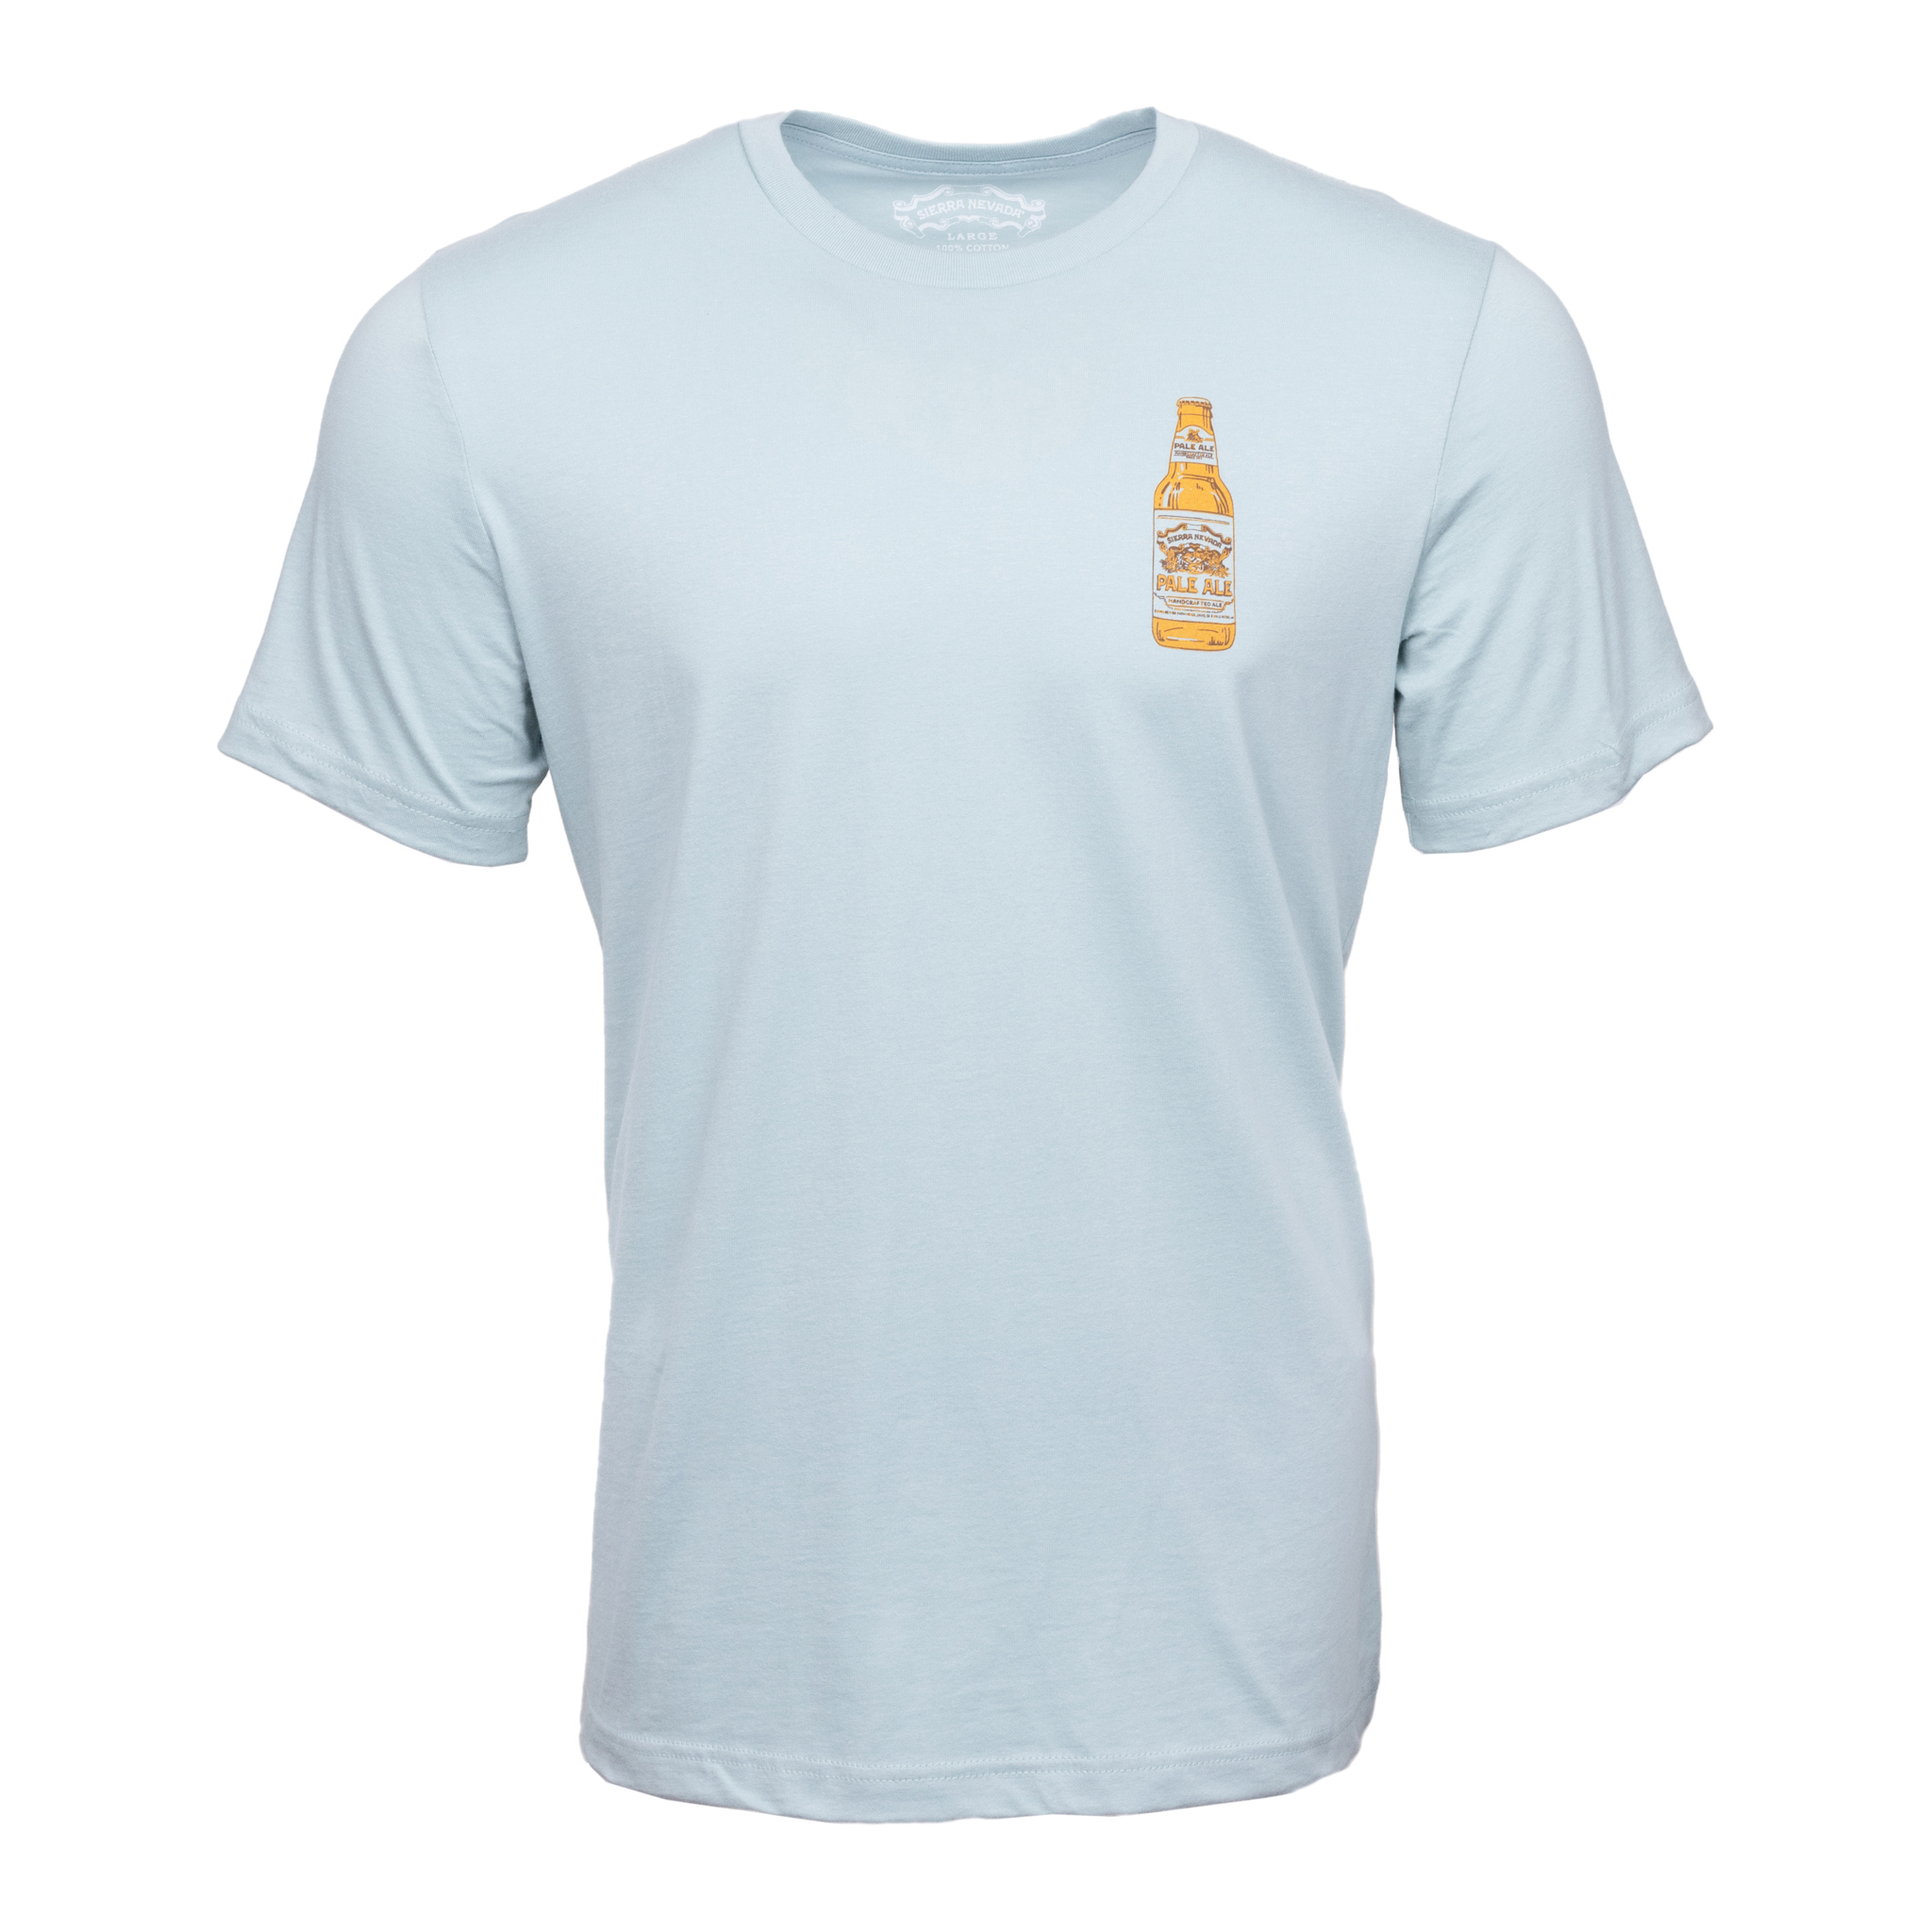 Sierra Nevada Brewing Co. Bottle Tee in Dusty Blue - front view featuring beer bottle graphic on chest